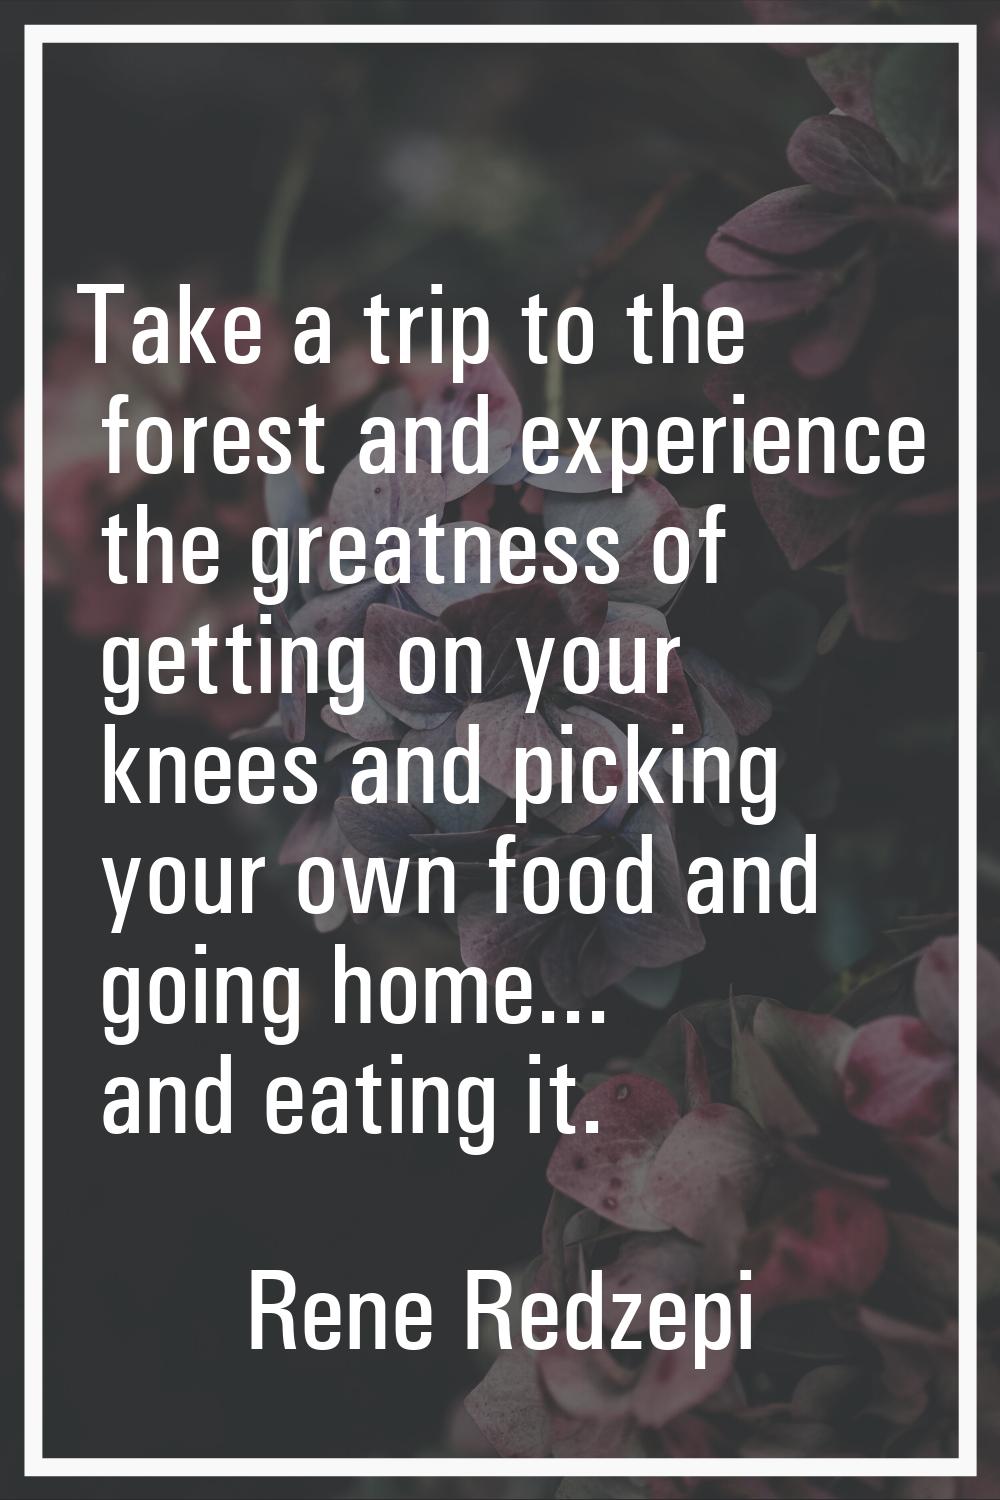 Take a trip to the forest and experience the greatness of getting on your knees and picking your ow